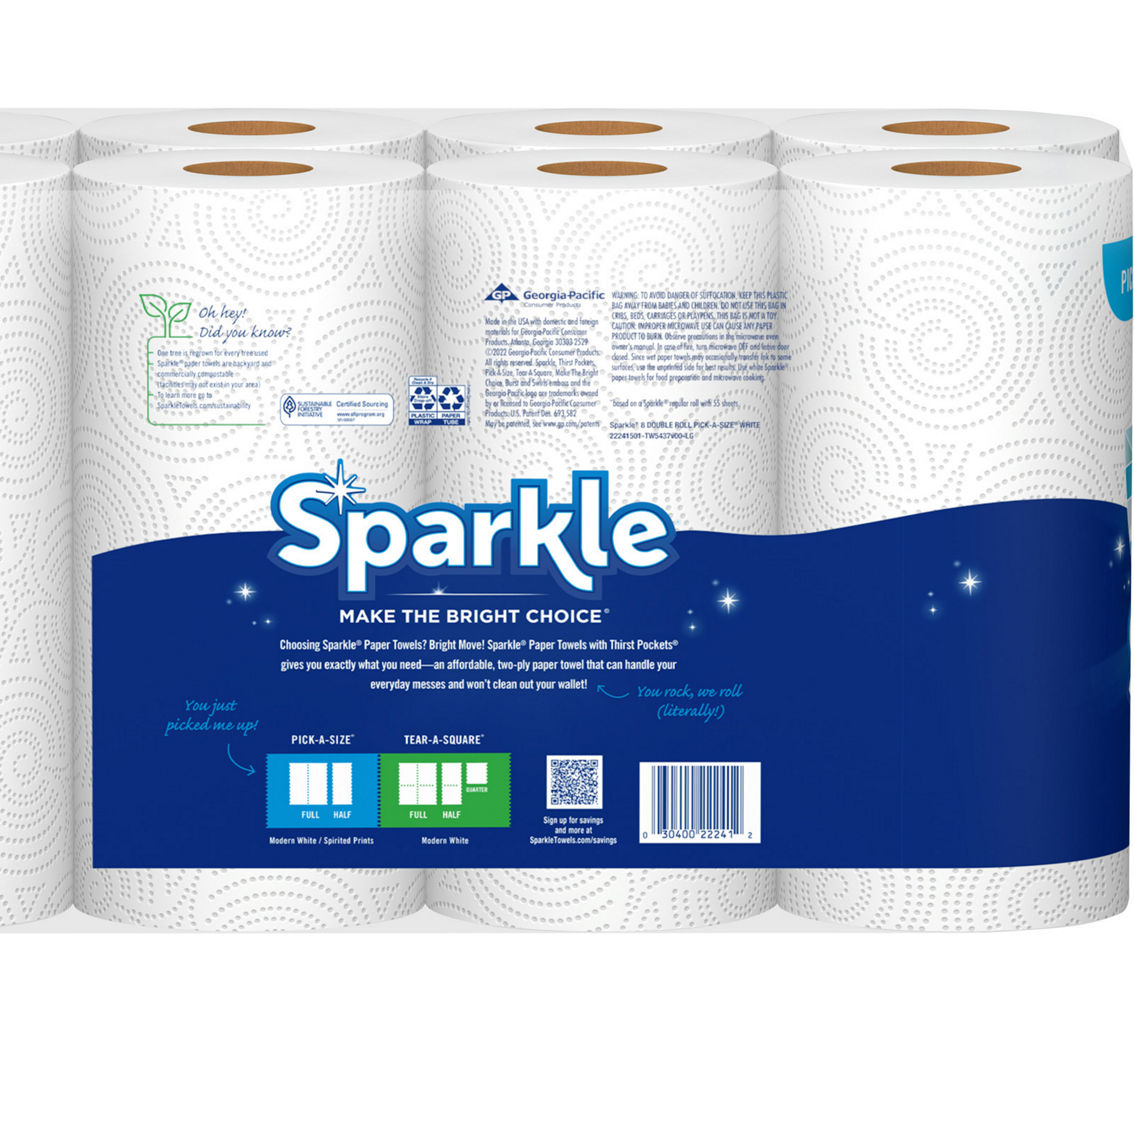 Sparkle Double Roll Pick A Size Paper Towels 8 pk. - Image 2 of 2